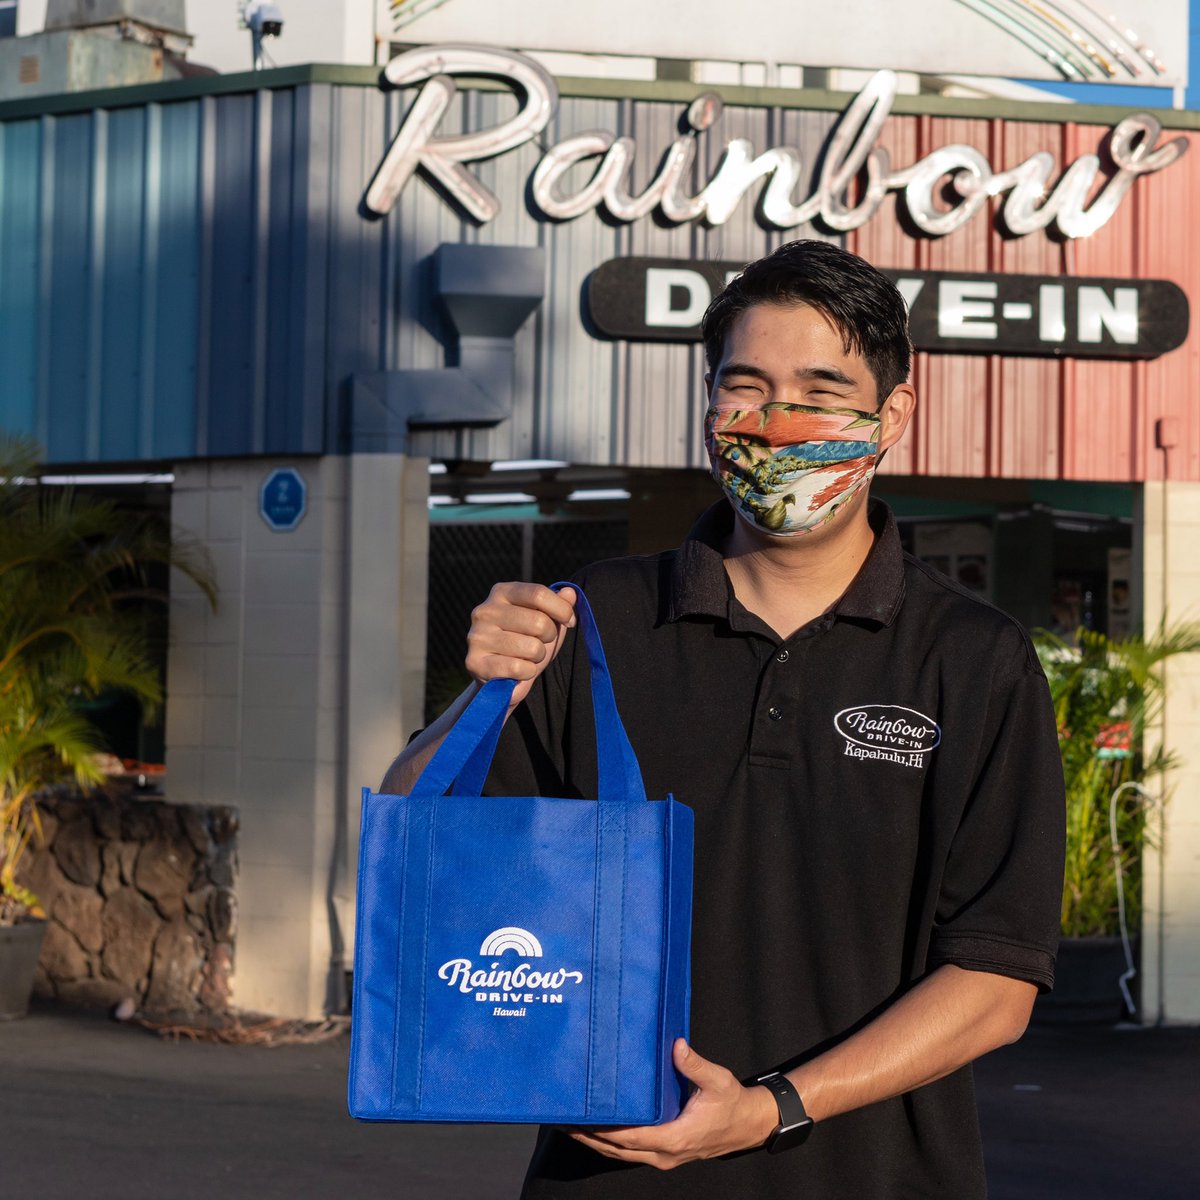 Rainbow Drive-In Kapahulu will reopen tomorrow 8/29 with modified hours! We will be OPEN FOR TAKEOUT from 10a-7p daily! 🌈 Mahalo for your kind messages and continuous support of our restaurant! #rainbowdrivein #supportlocalbusiness #openfortakeout